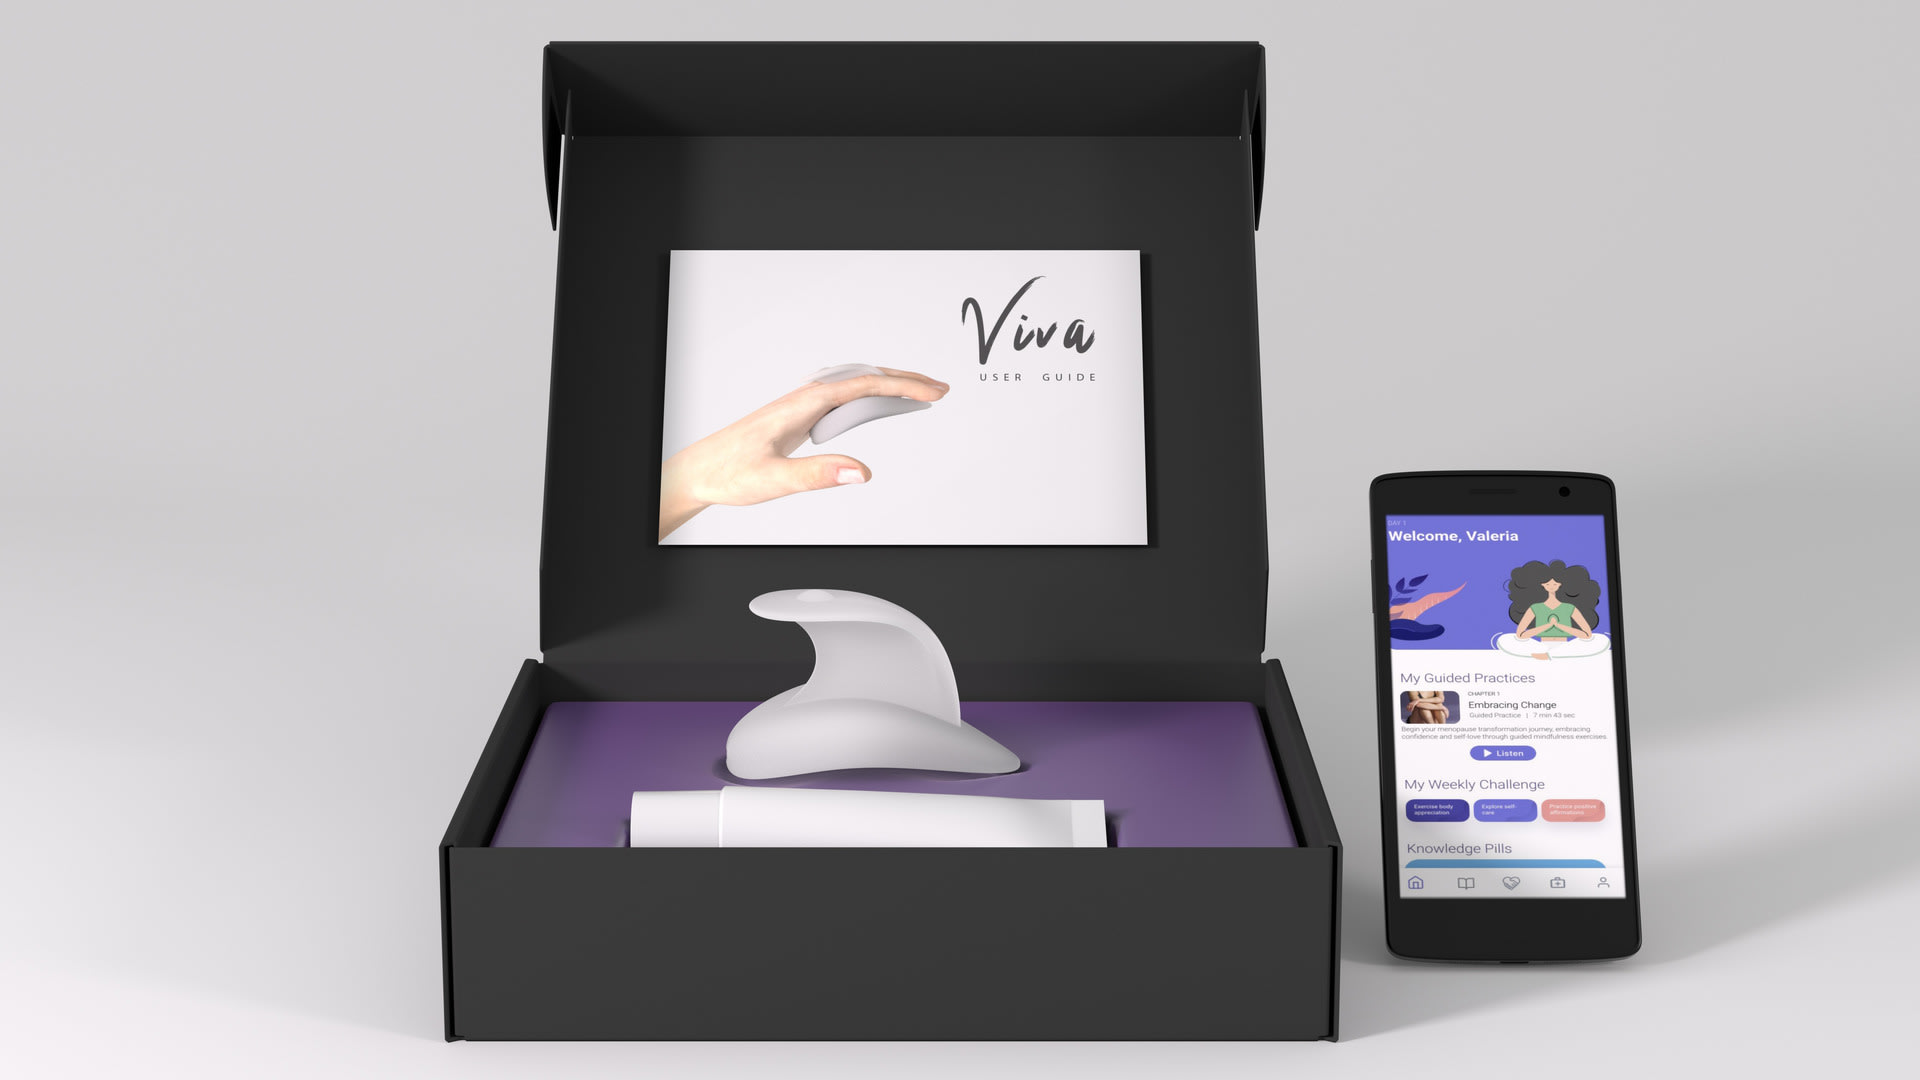 Digital render showing viva kit (box, device, sexual hygiene product) and phone with app screen